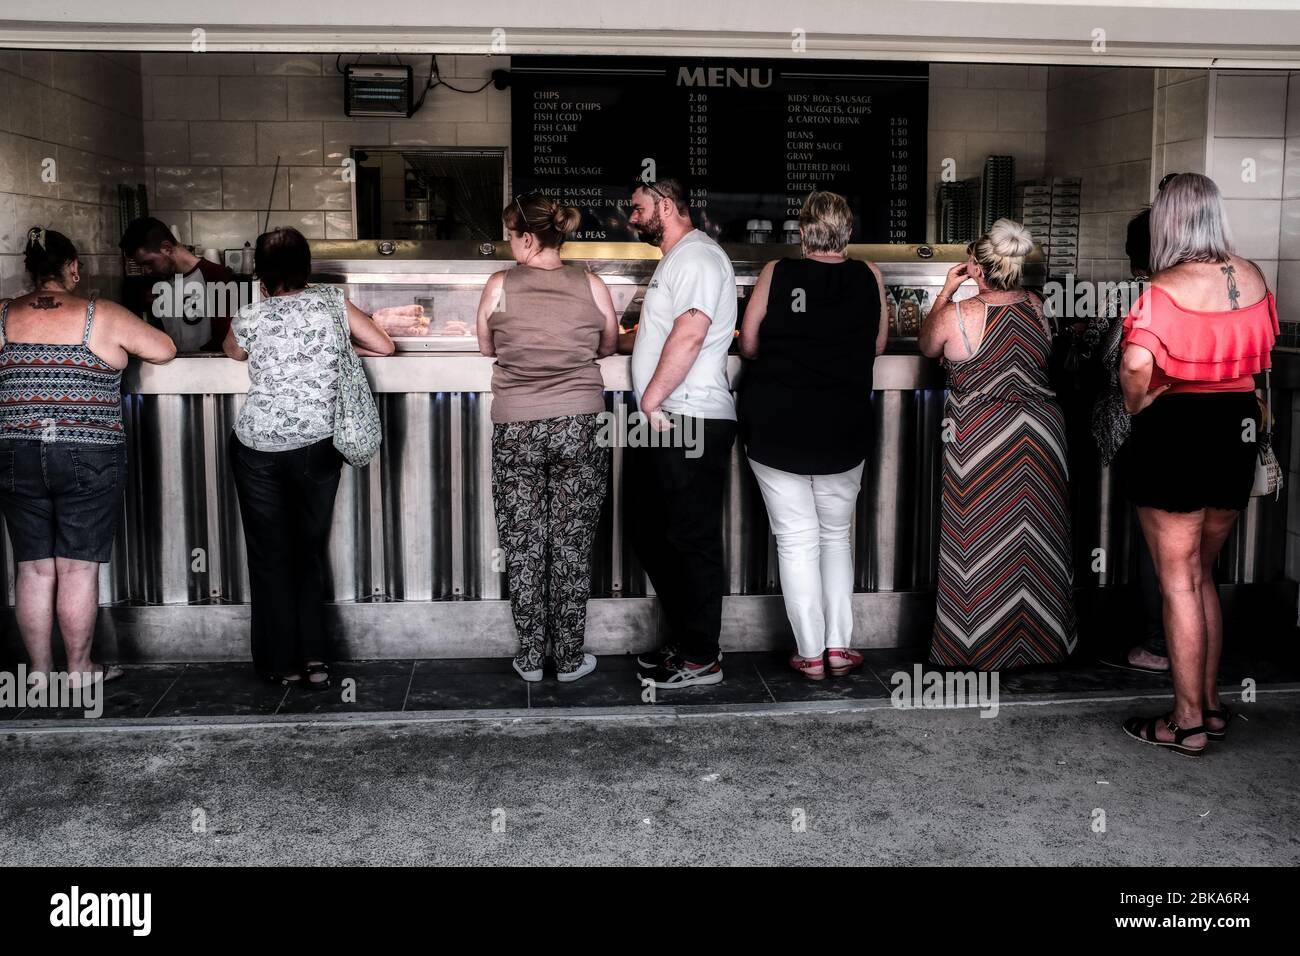 Tourists in the seaside town of Porthcawl South Wales UK getting some fast food. Stock Photo